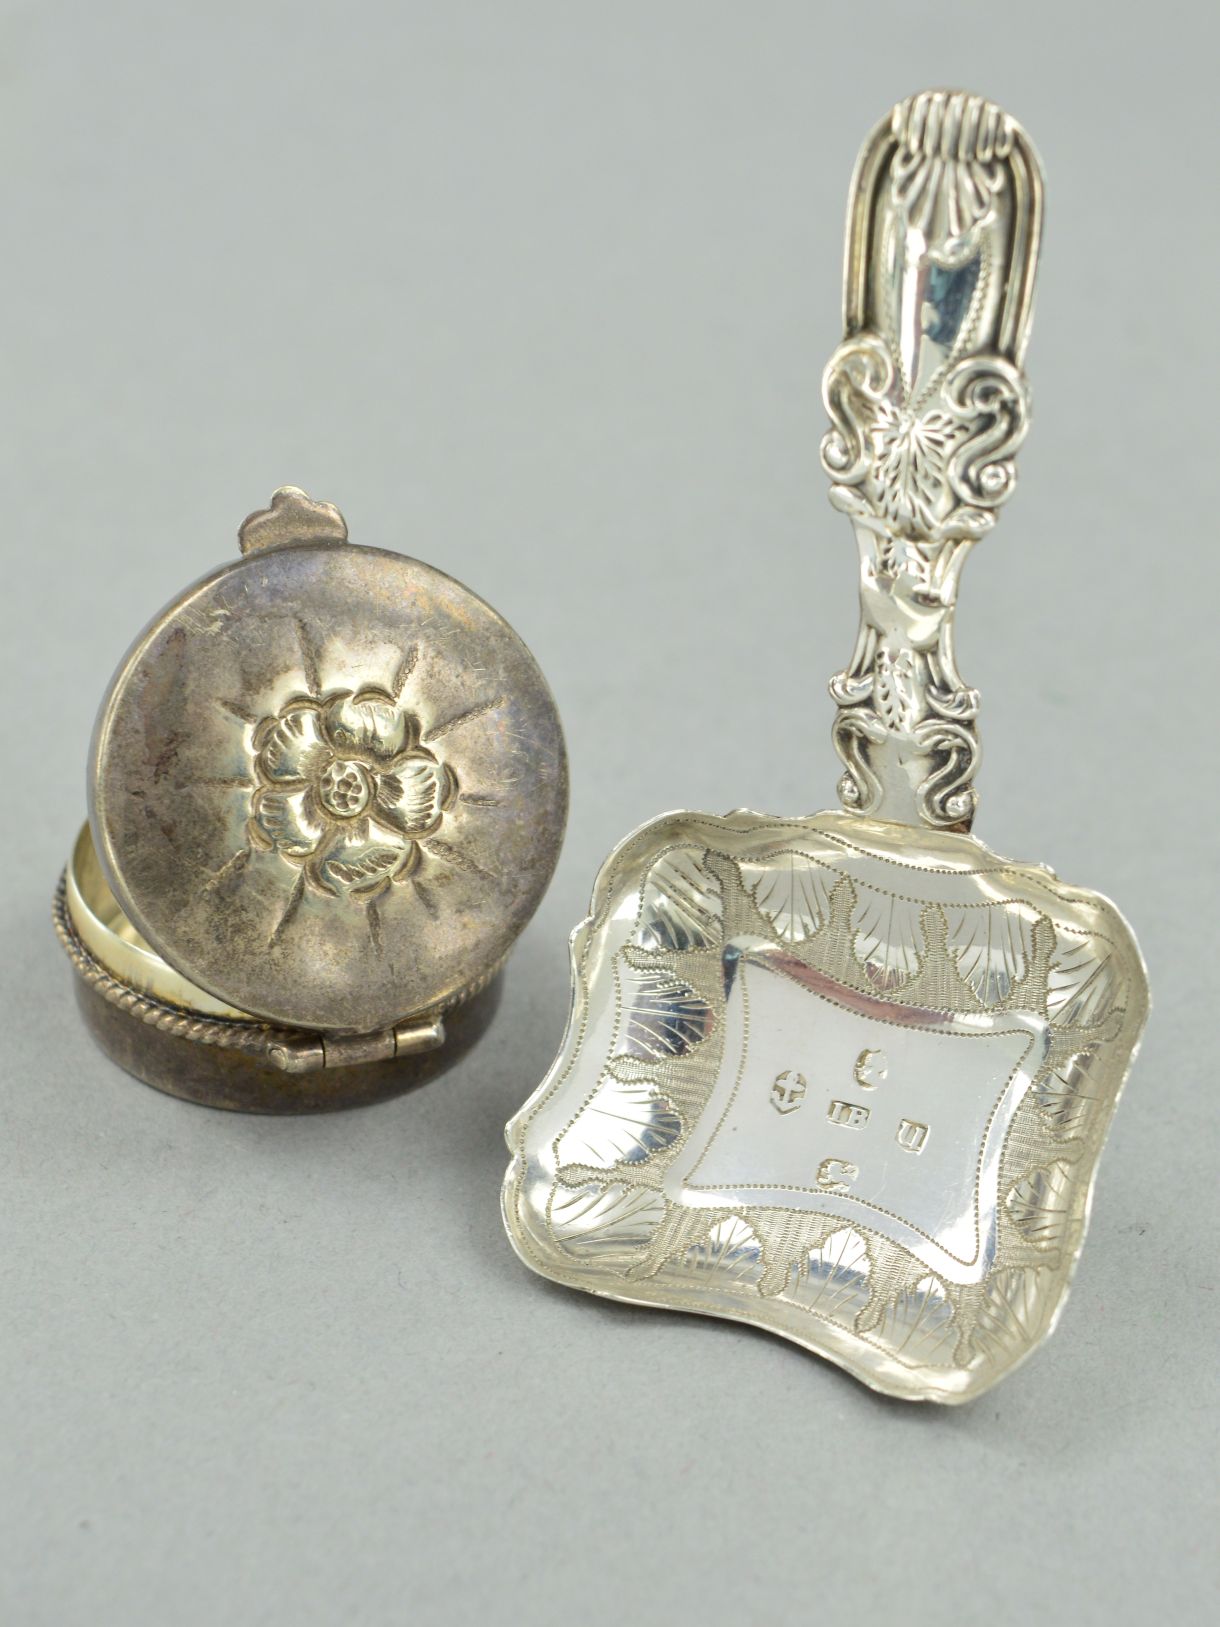 A SILVER GEORGIAN CADDY SPOON AND A PILL BOX, the caddy spoon with scrolling detail to the handle